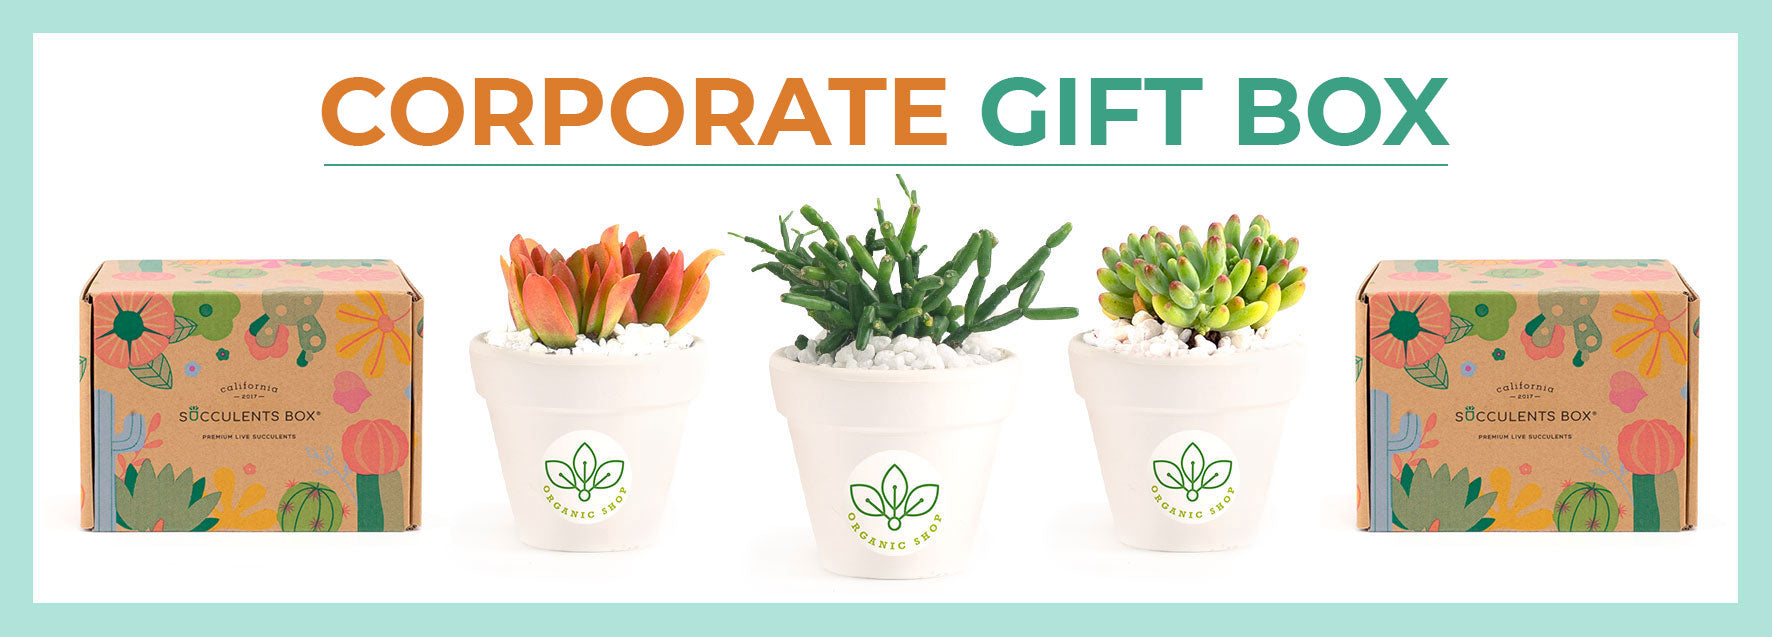 Succulent Corporate Gift Boxes for Sale, Succulent Gift Ideas, Succulents Gift Box for Sale Online